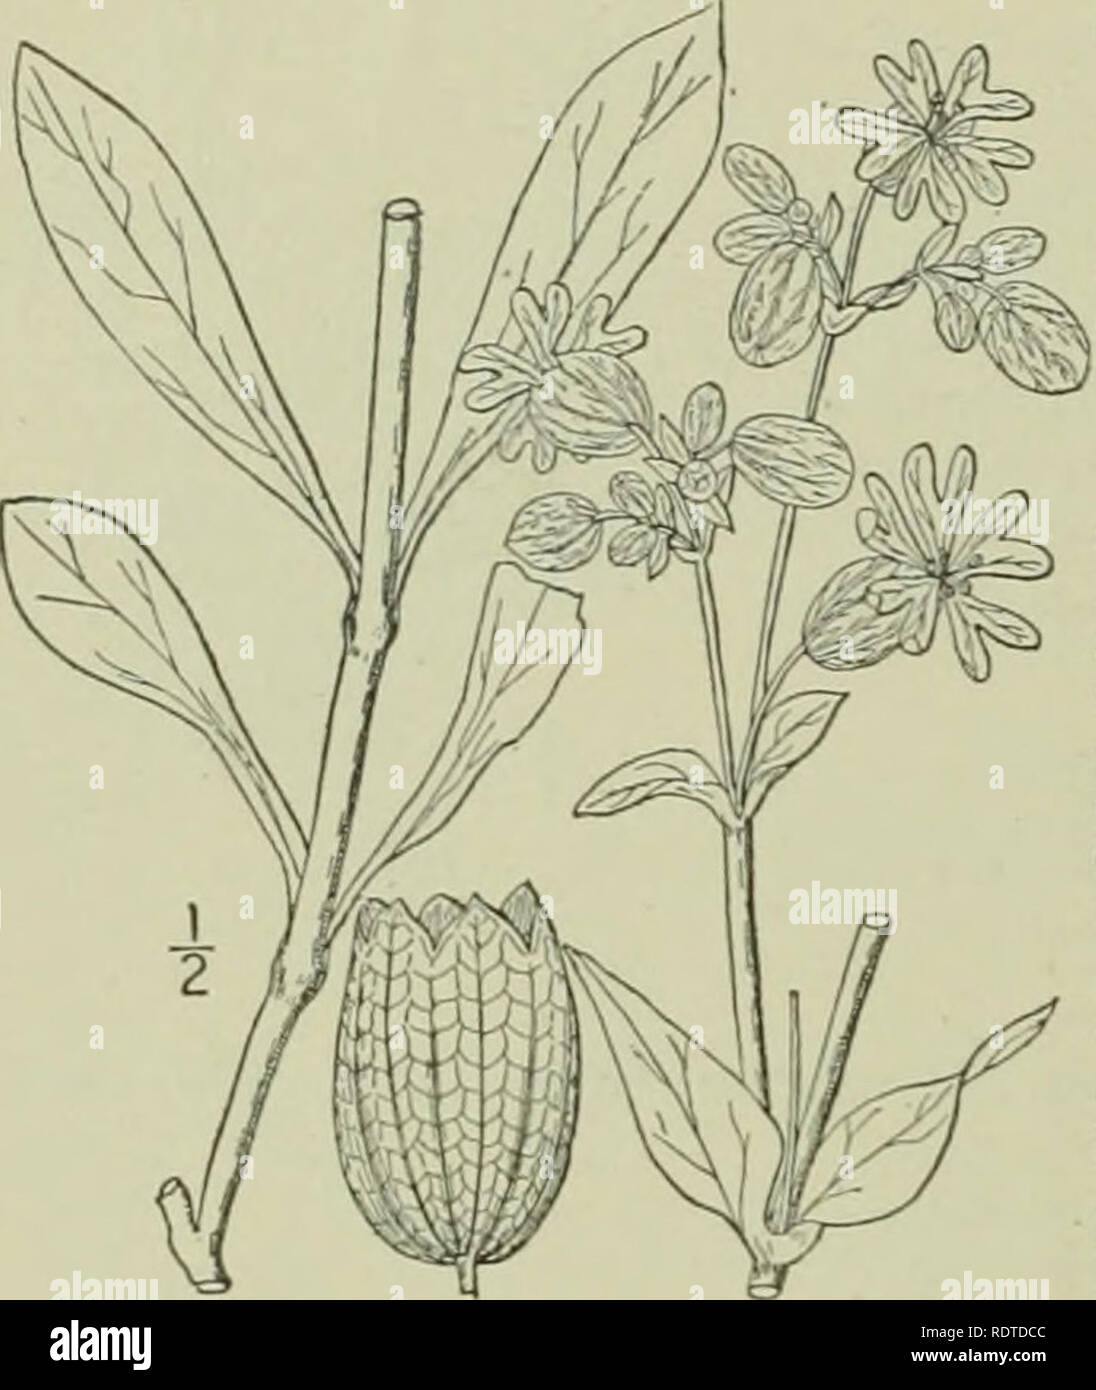 . An illustrated flora of the northern United States, Canada and the British possessions : from Newfoundland to the parallel of the southern boundary of Virginia and from the Atlantic Ocean westward to the 102nd meridian. Botany. CARYOPHYLLACEAE. VuL. II. 4. Silene latifolia (Mill.) Britten &amp; Rendle. Bladder Campion. Fig. 1804. Cucubalus Behen L. Sp. PI. 414. 1753. Not SUene Behen L. Cucubalus latifolius Mill. Card. Diet. Ed. 8, no. 2. Behen vulgaris Moench, Meth. 709. 1794. 5. vulgaris Garcke, Fl. Deutsch. Ed. 9, 64. 1869. Silene inflata J. E. Smith, Fl. Brit. 2: 292. 1800. ^J5'. latifoli Stock Photo